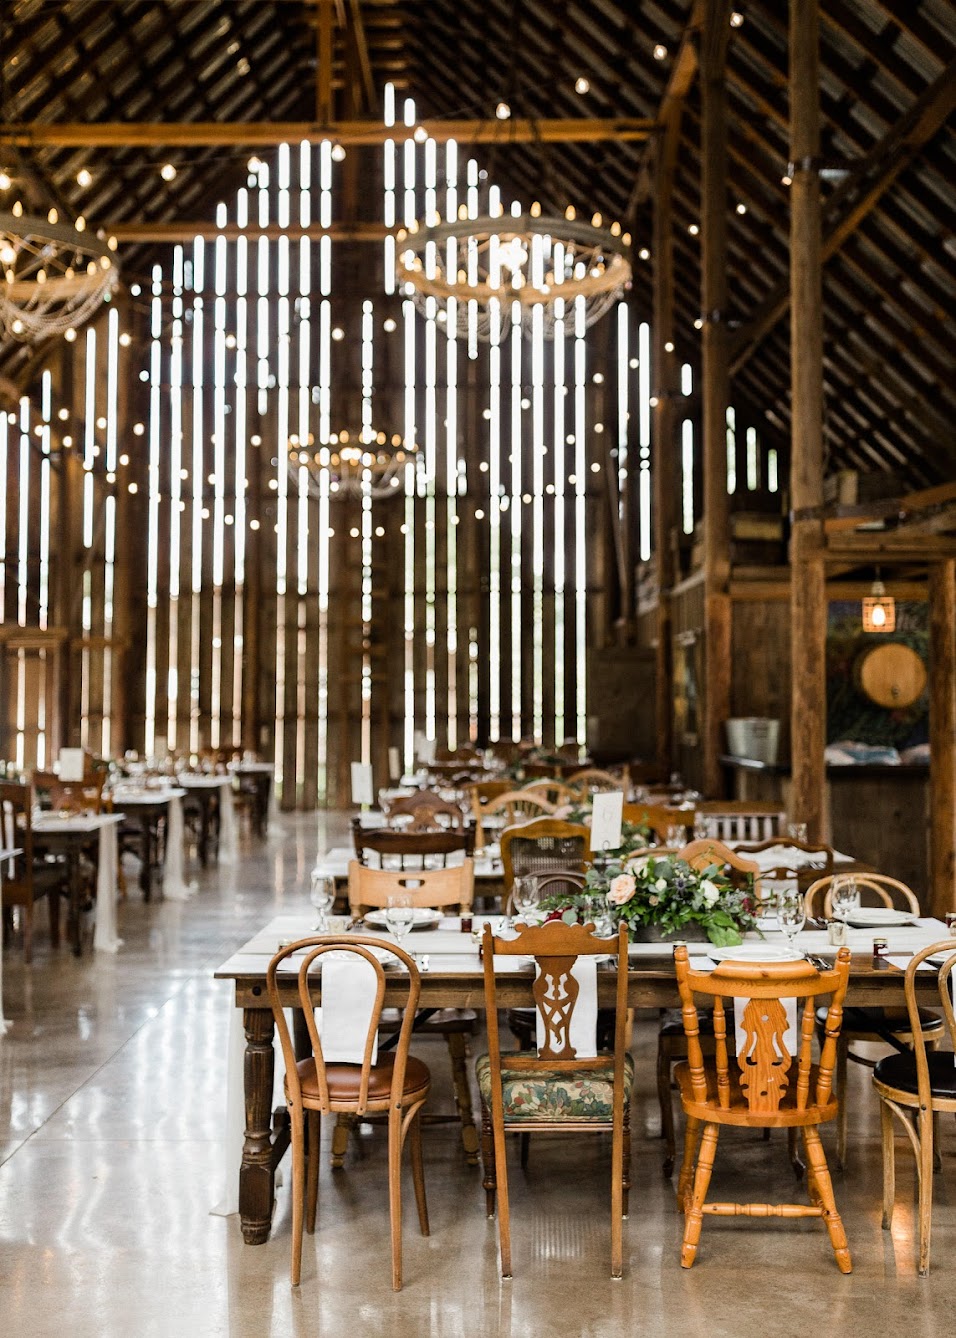 A wedding reception set in a rustic barn, with farm tables and a mix of different wooden chairs.